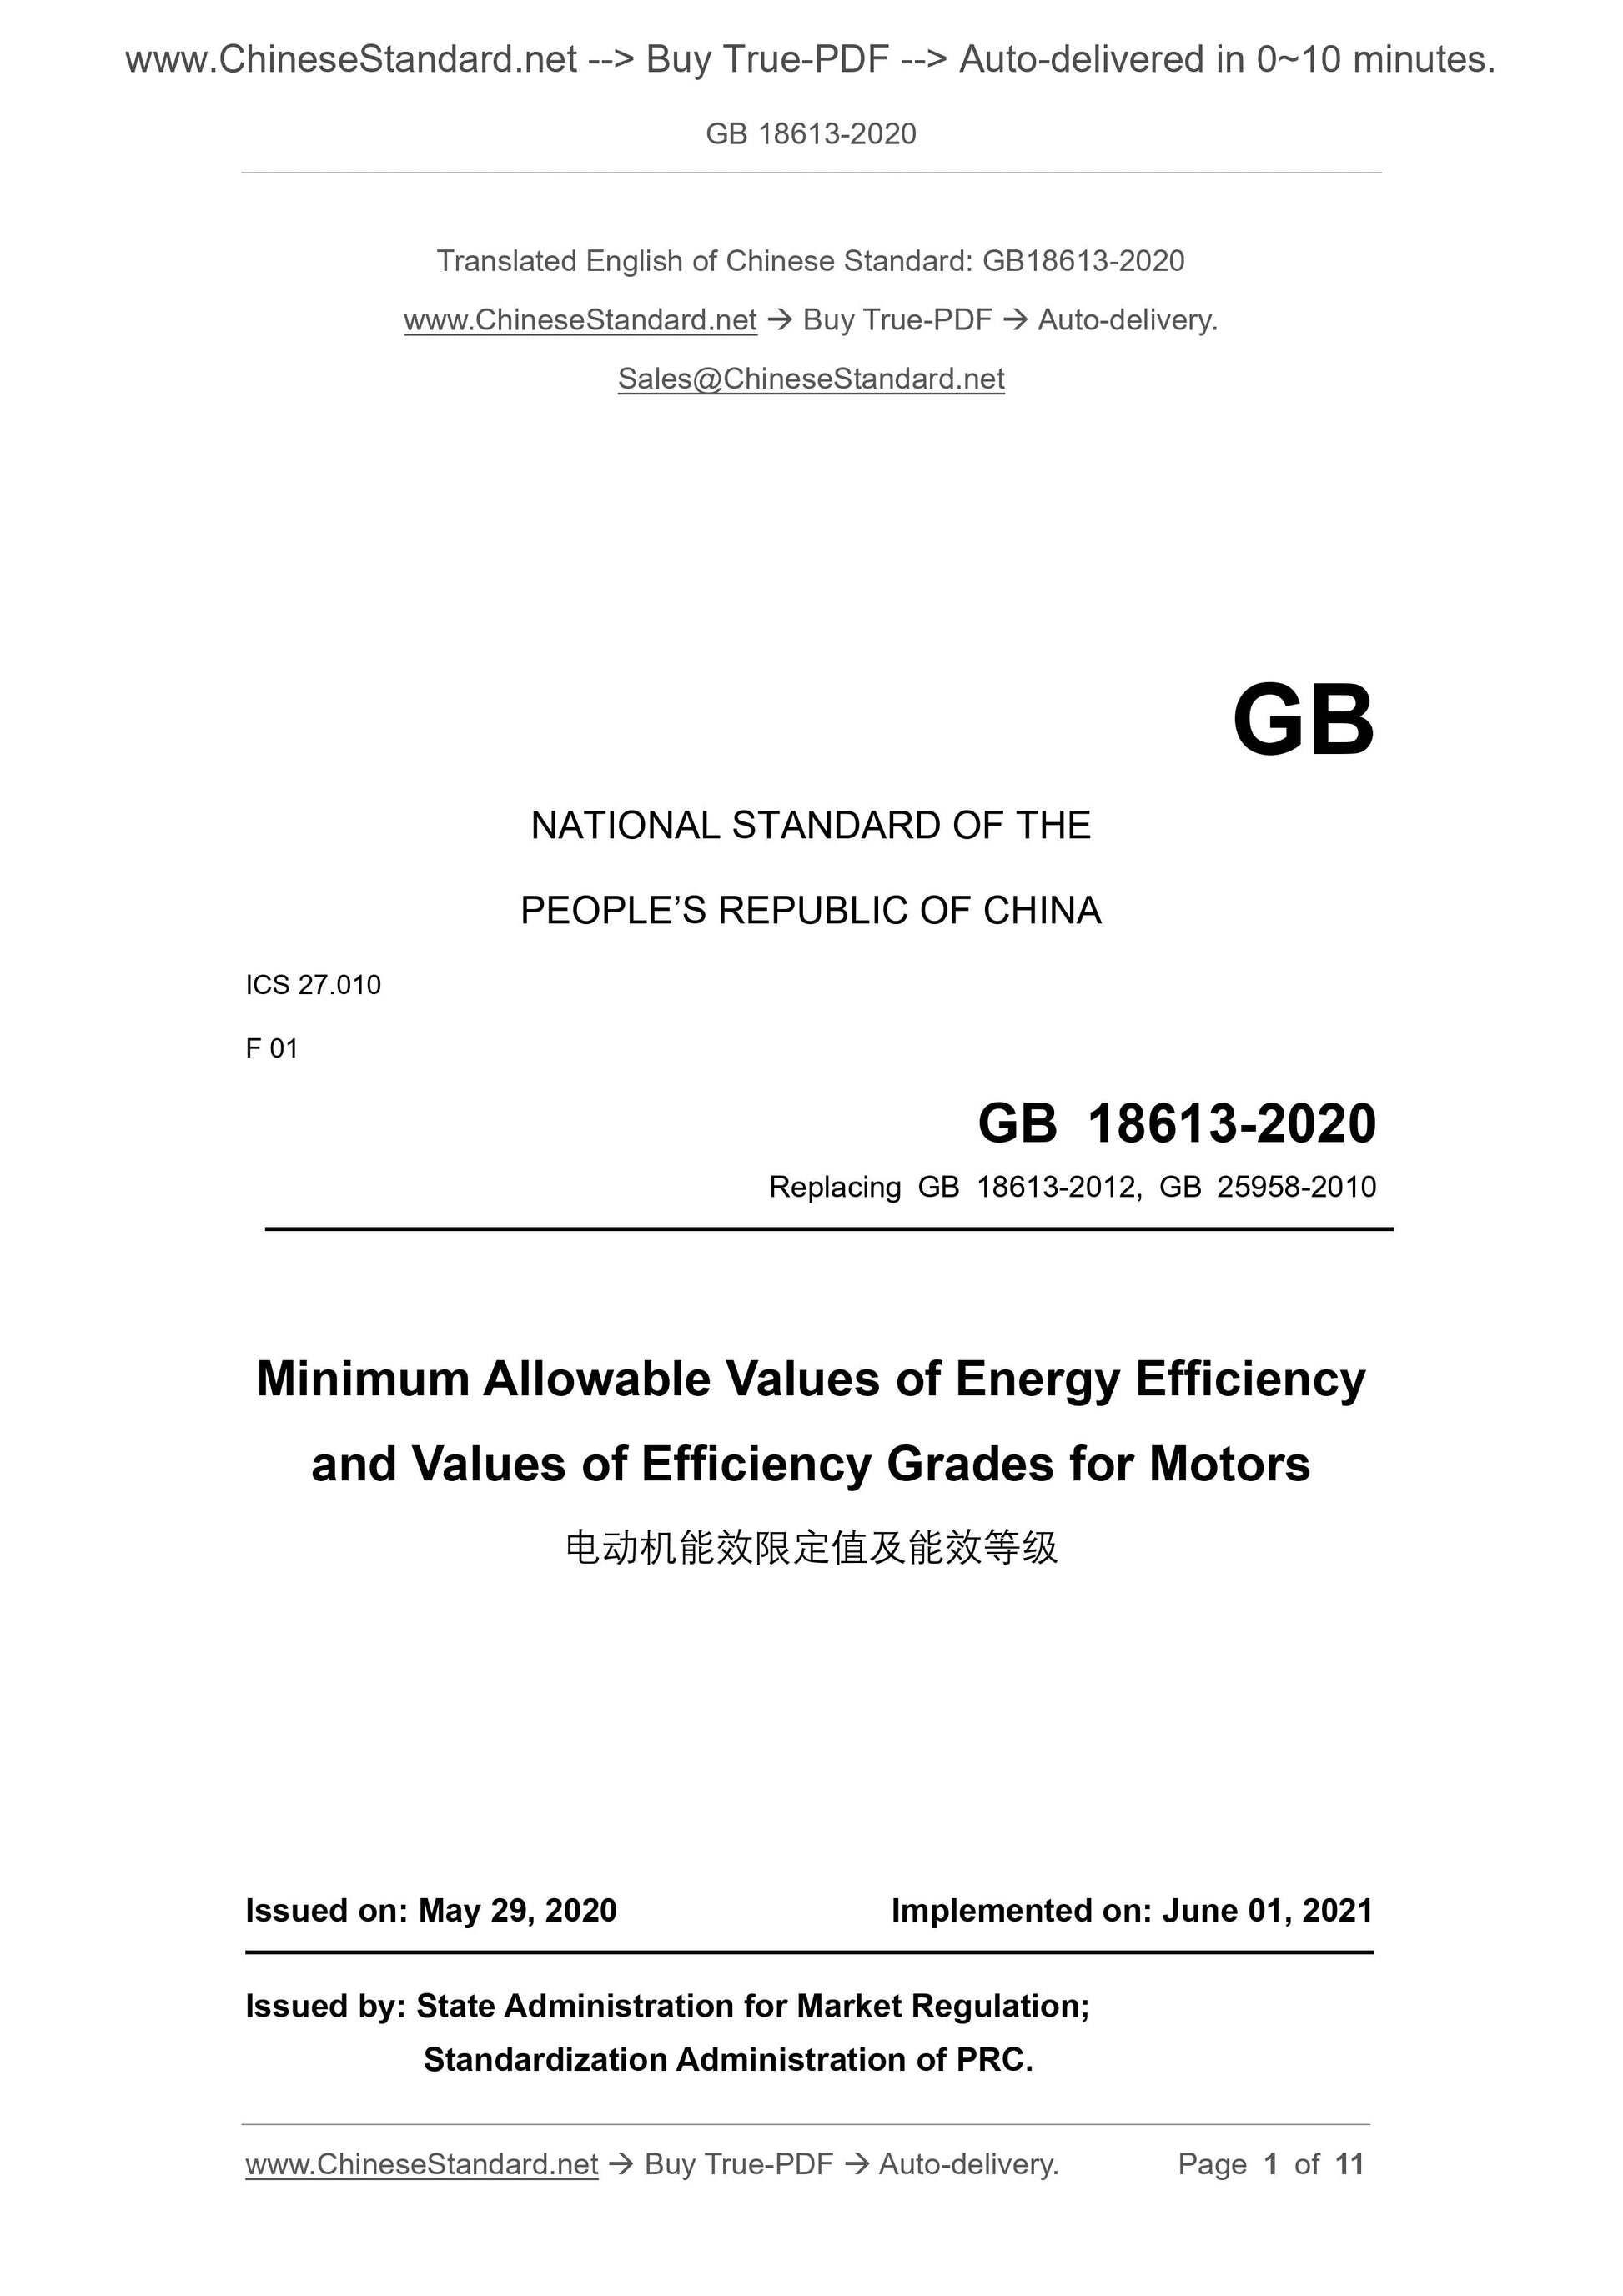 GB 18613-2020 Page 1